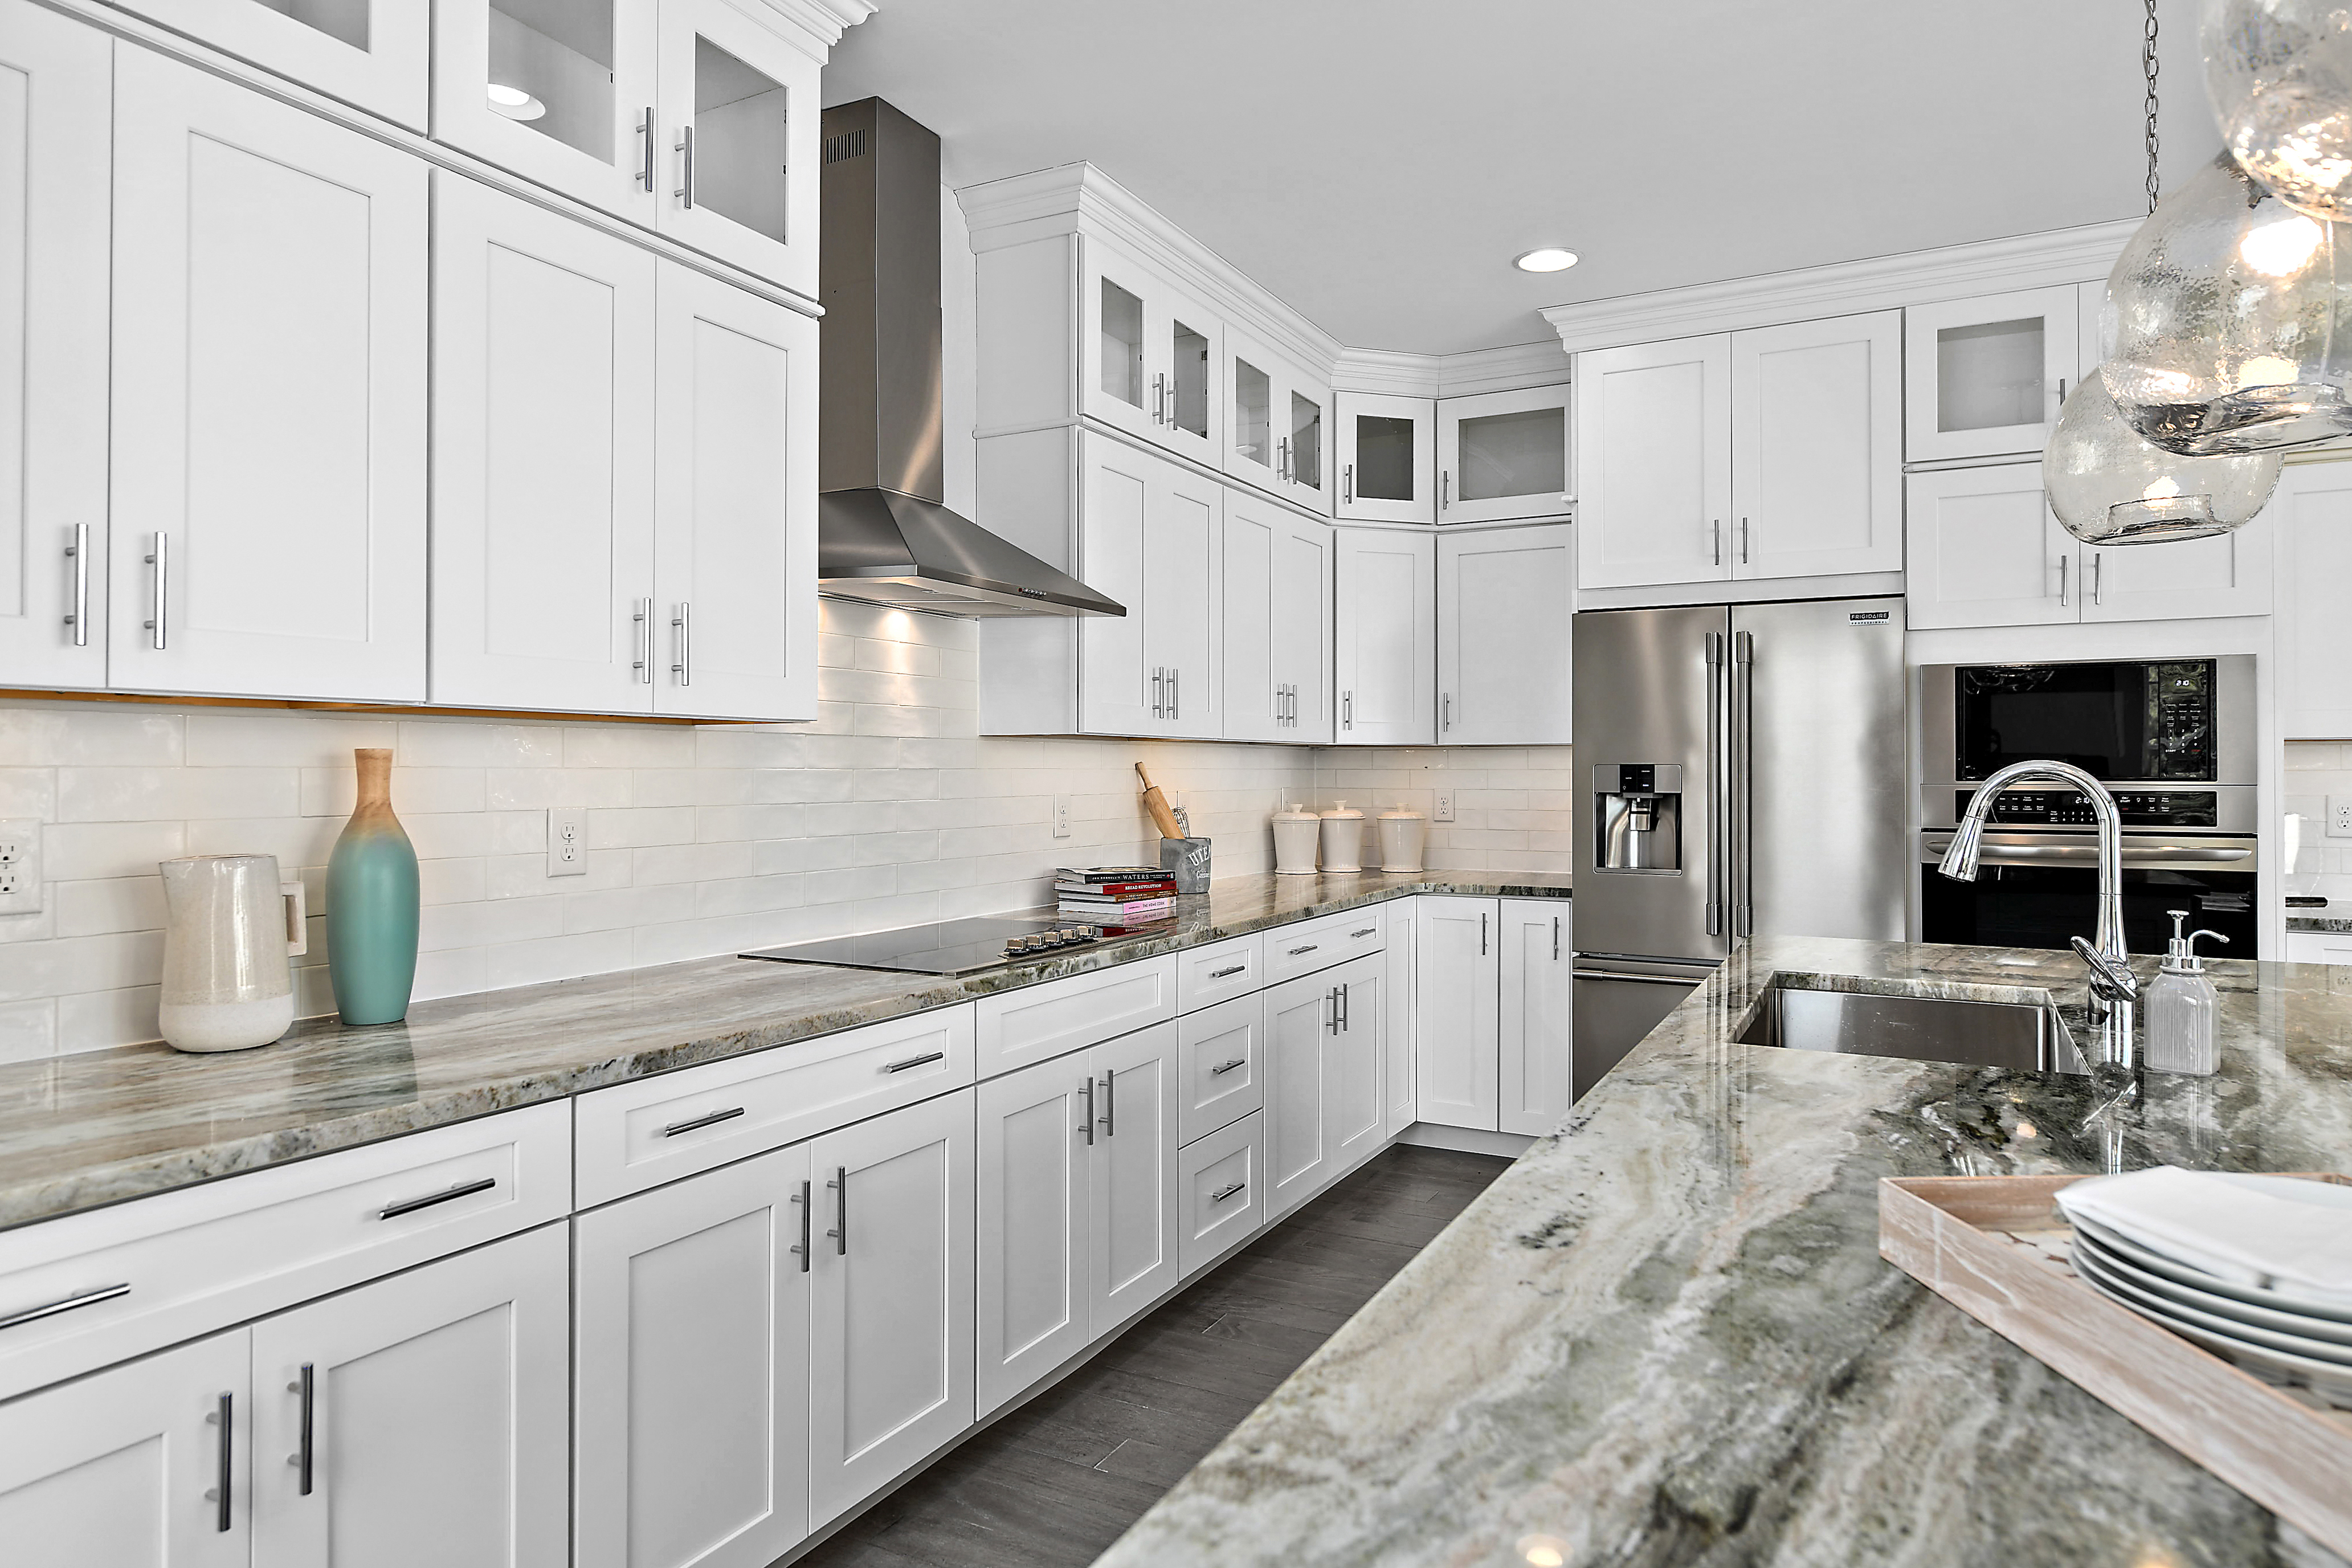 Gourmet Kitchen with White Cabinets, Glass Double Stacked Cabinets, Granite Counters, and Stainless Steel Appliances